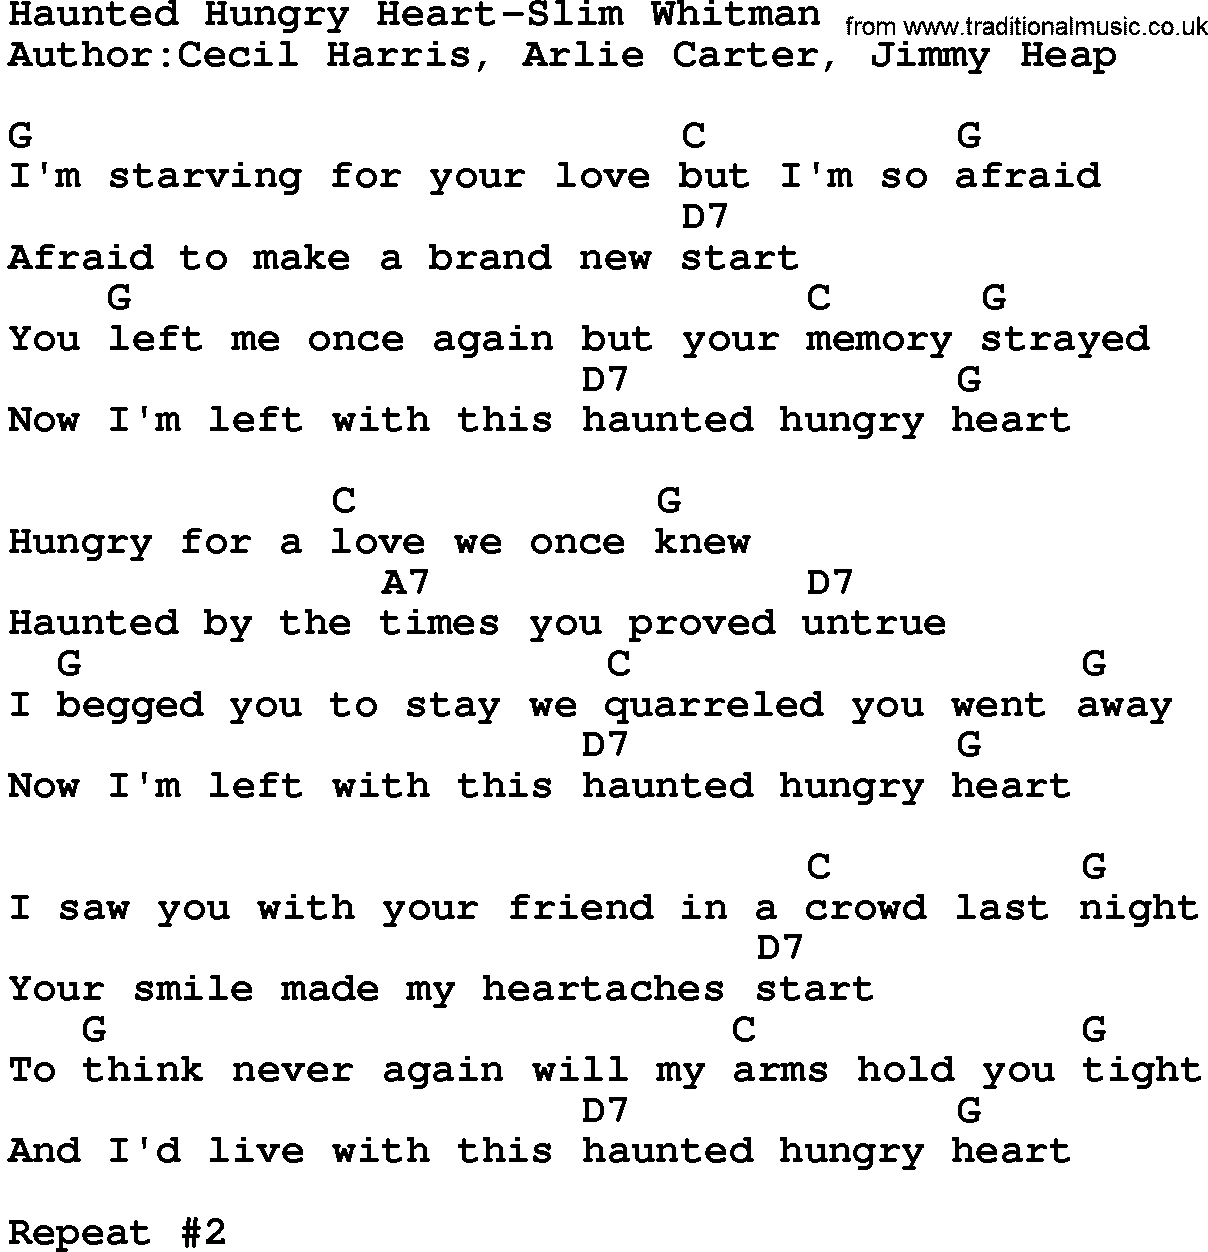 Country music song: Haunted Hungry Heart-Slim Whitman lyrics and chords